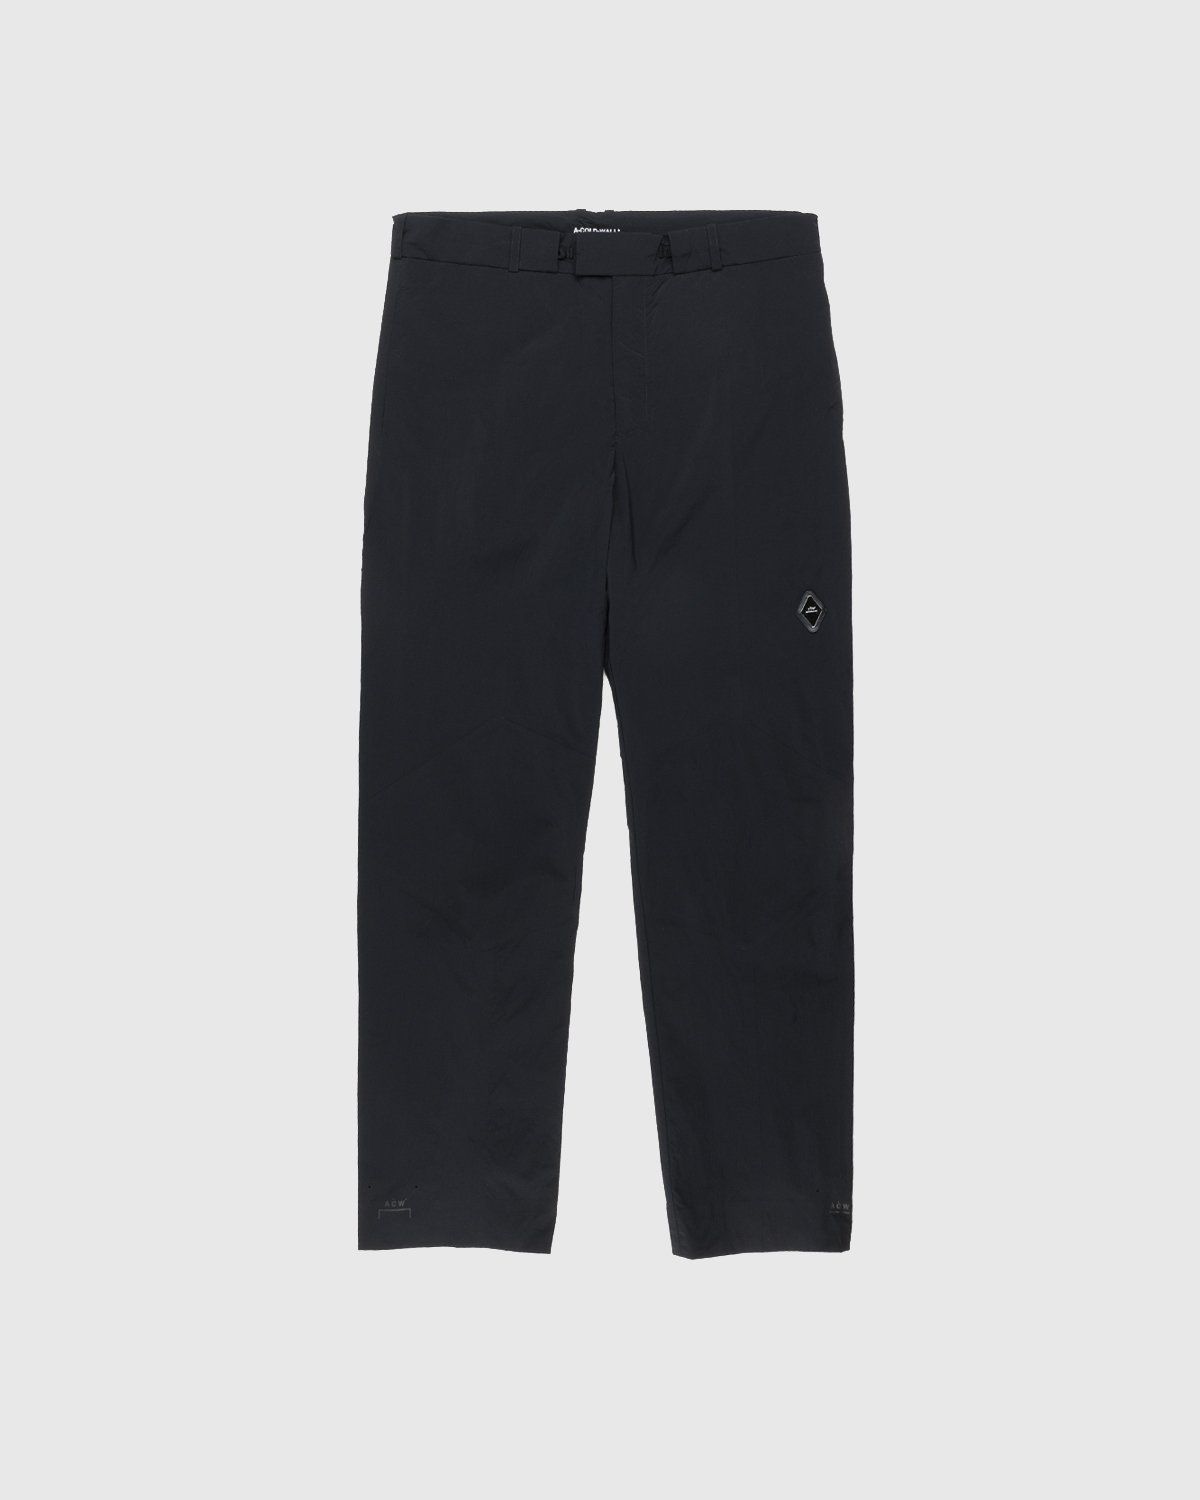 A-Cold-Wall* – Stealth Nylon Pants Black - Trousers - Black - Image 1